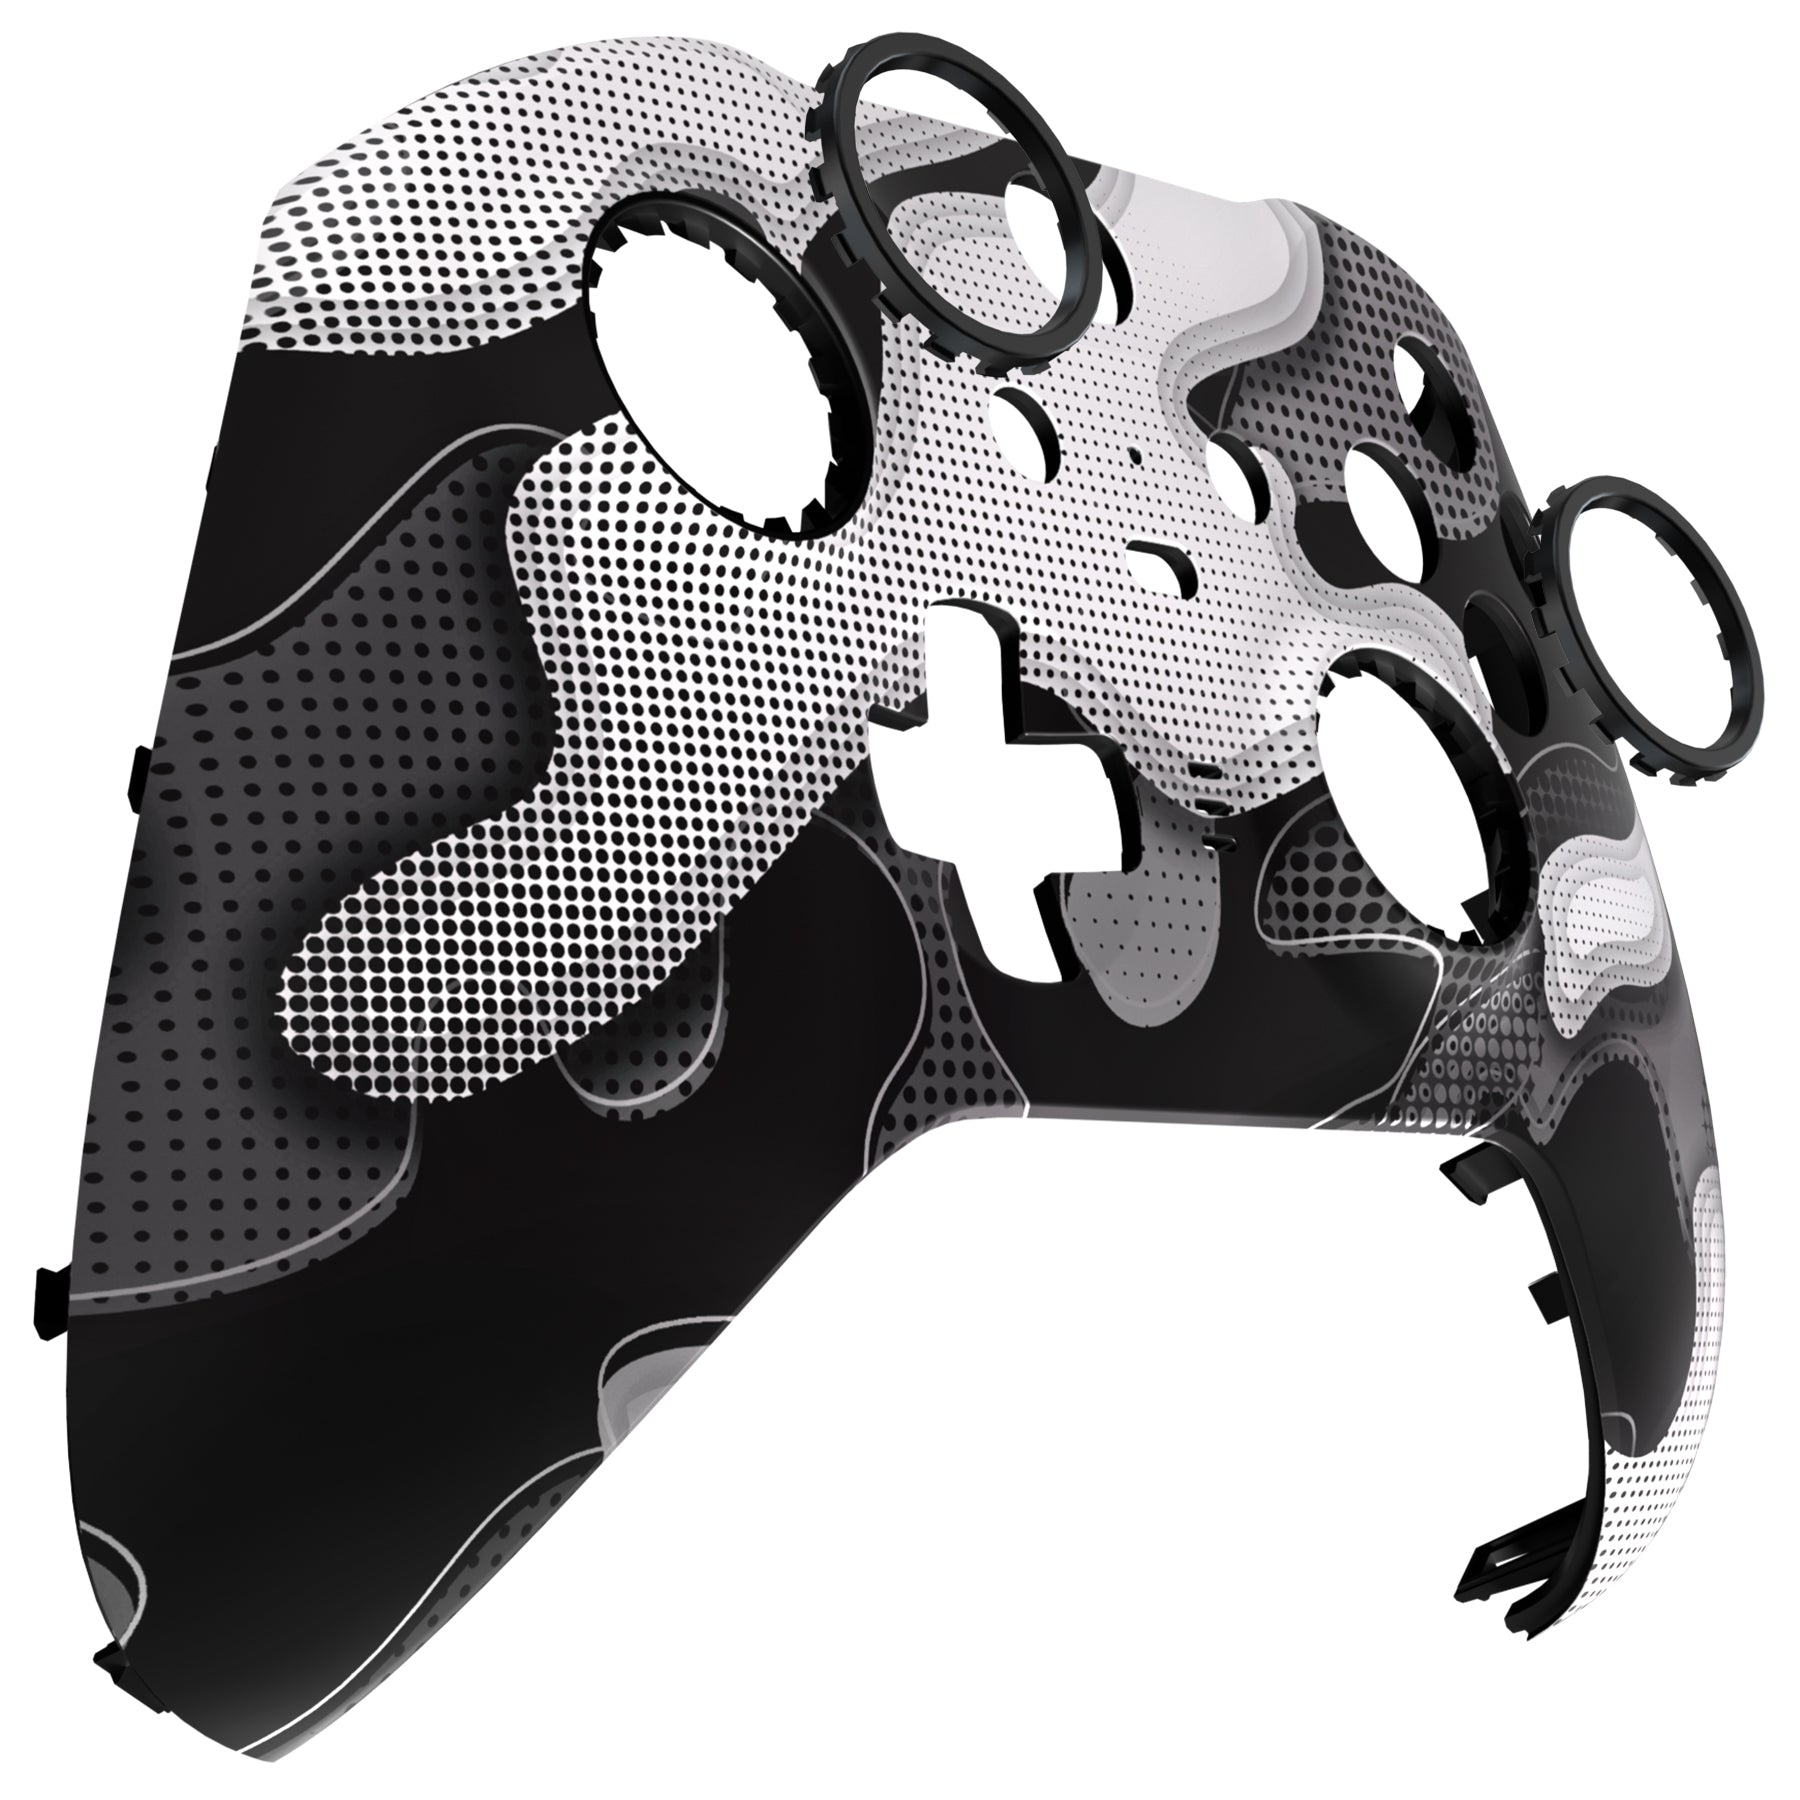 eXtremeRate Retail Black White Camouflage Faceplate Cover, Soft Touch Front Housing Shell Case Replacement Kit for Xbox One Elite Series 2 Controller Model 1797 - Thumbstick Accent Rings Included - ELT147